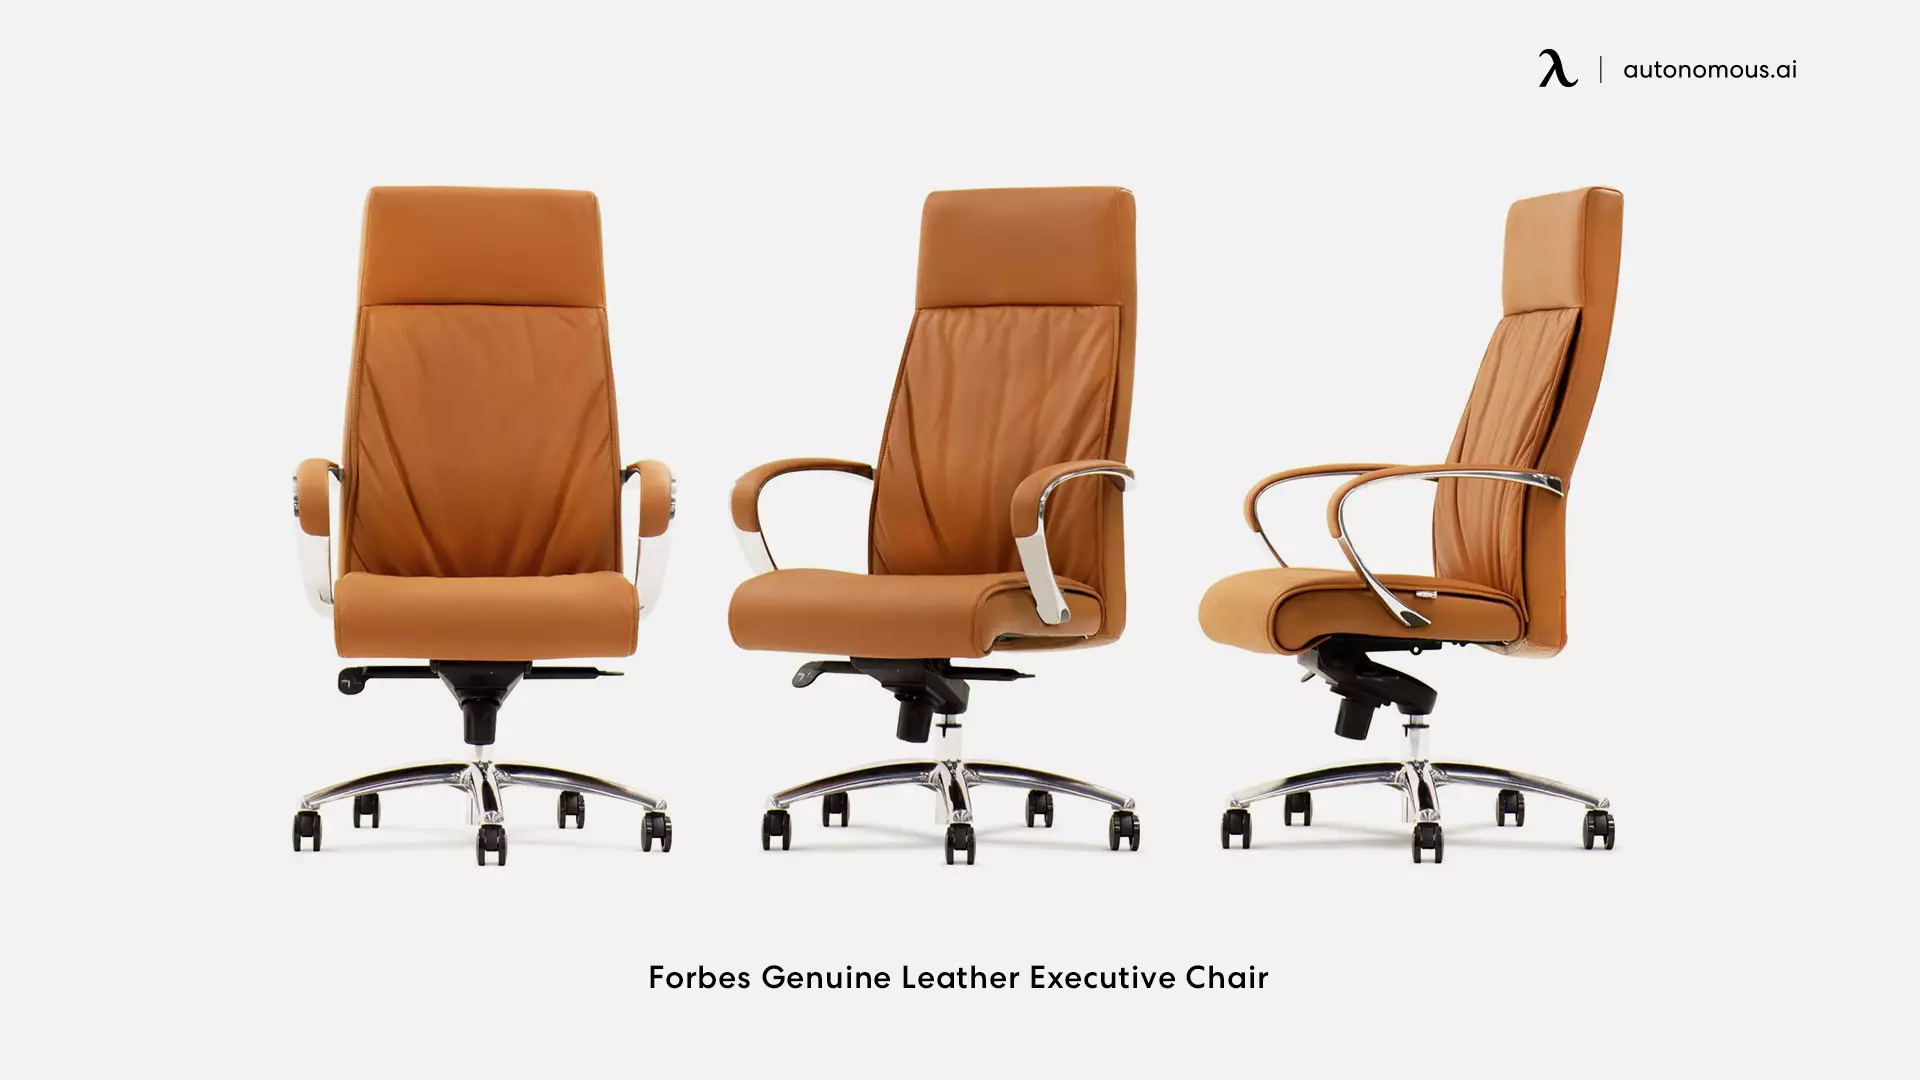 Forbes Genuine Leather Executive Chair